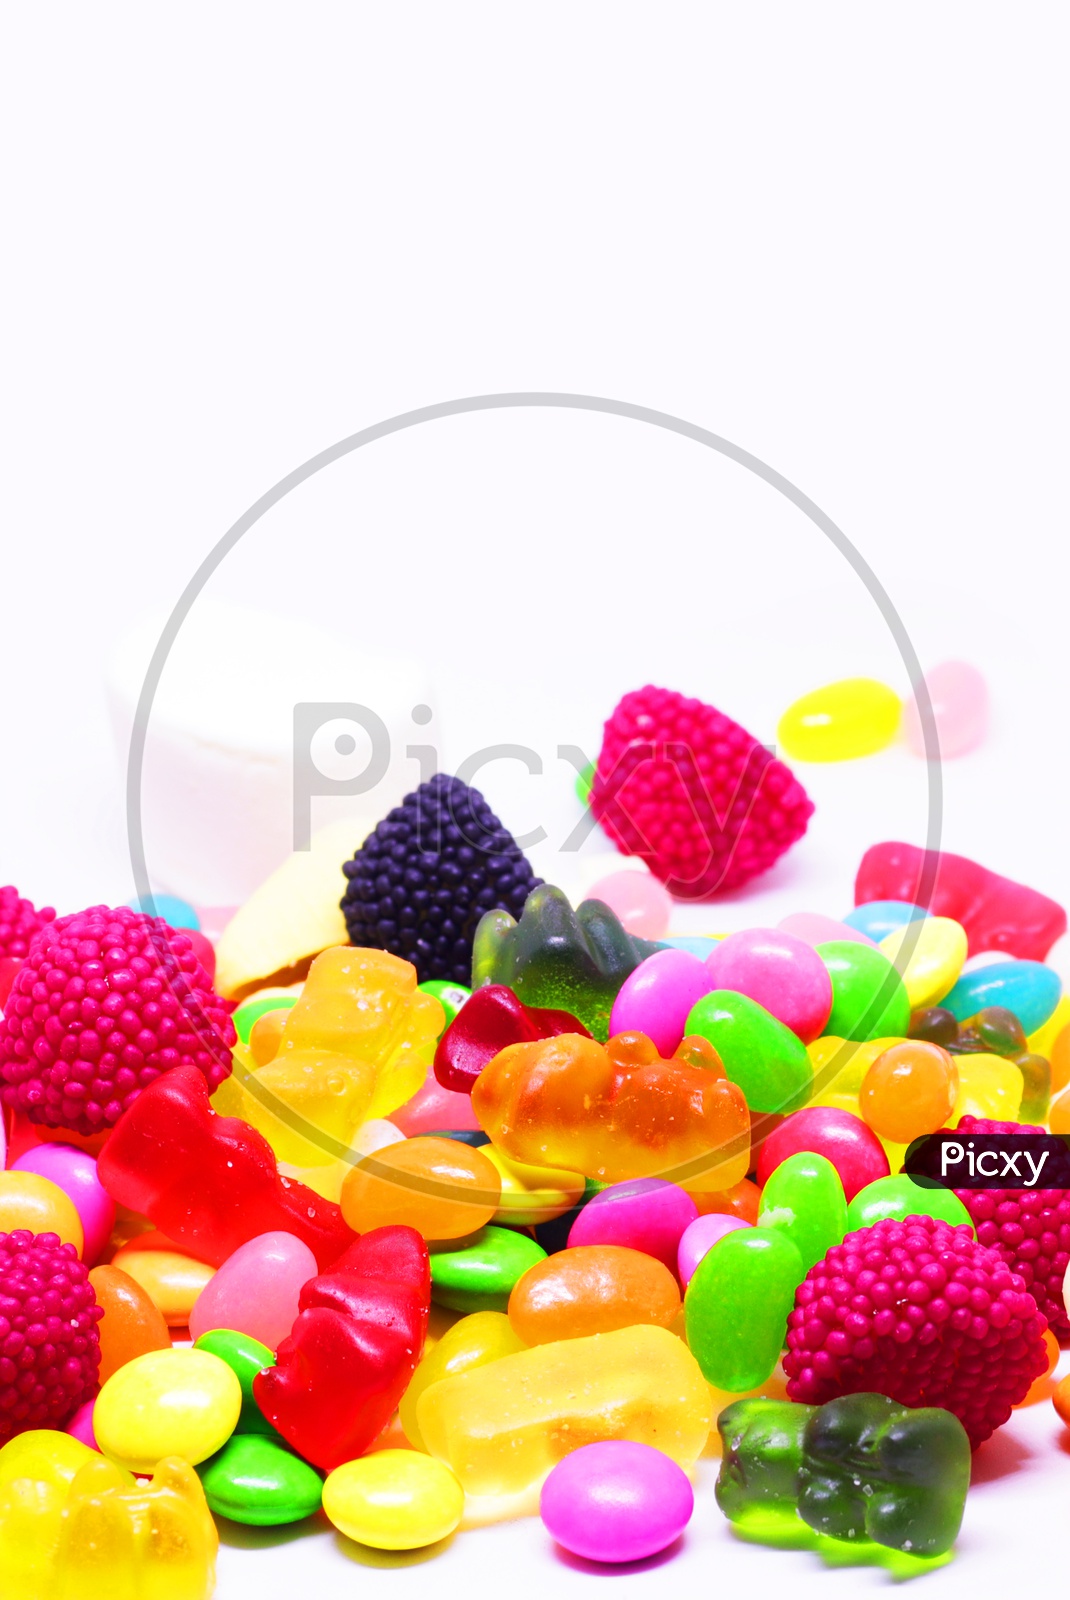 Multiple Coloured Sugar Candy In White Background In Vertical Orientation